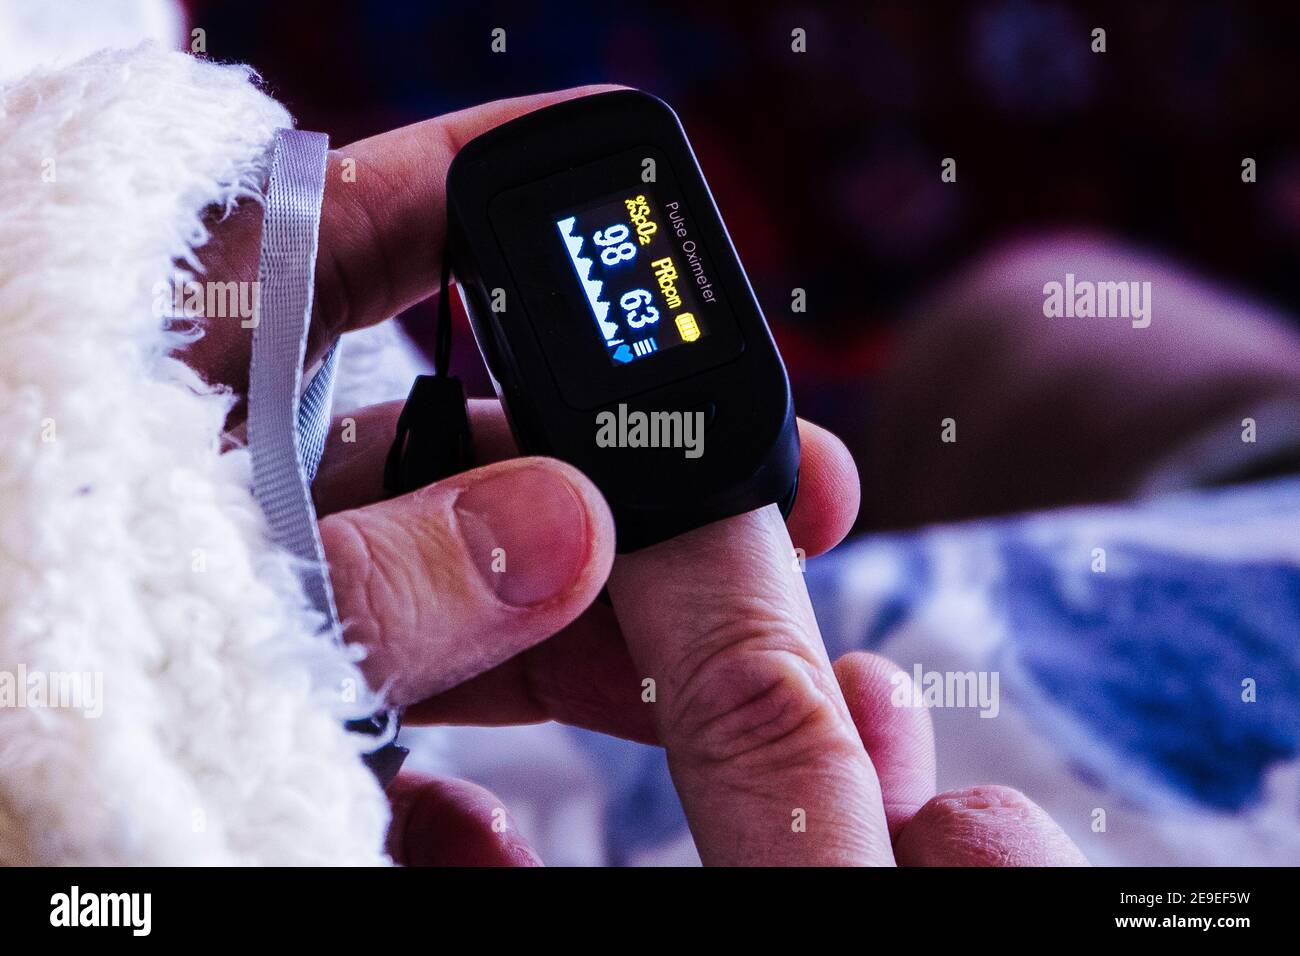 Measuring saturation with a finger pulse oximeter during coronavirus positivity Stock Photo